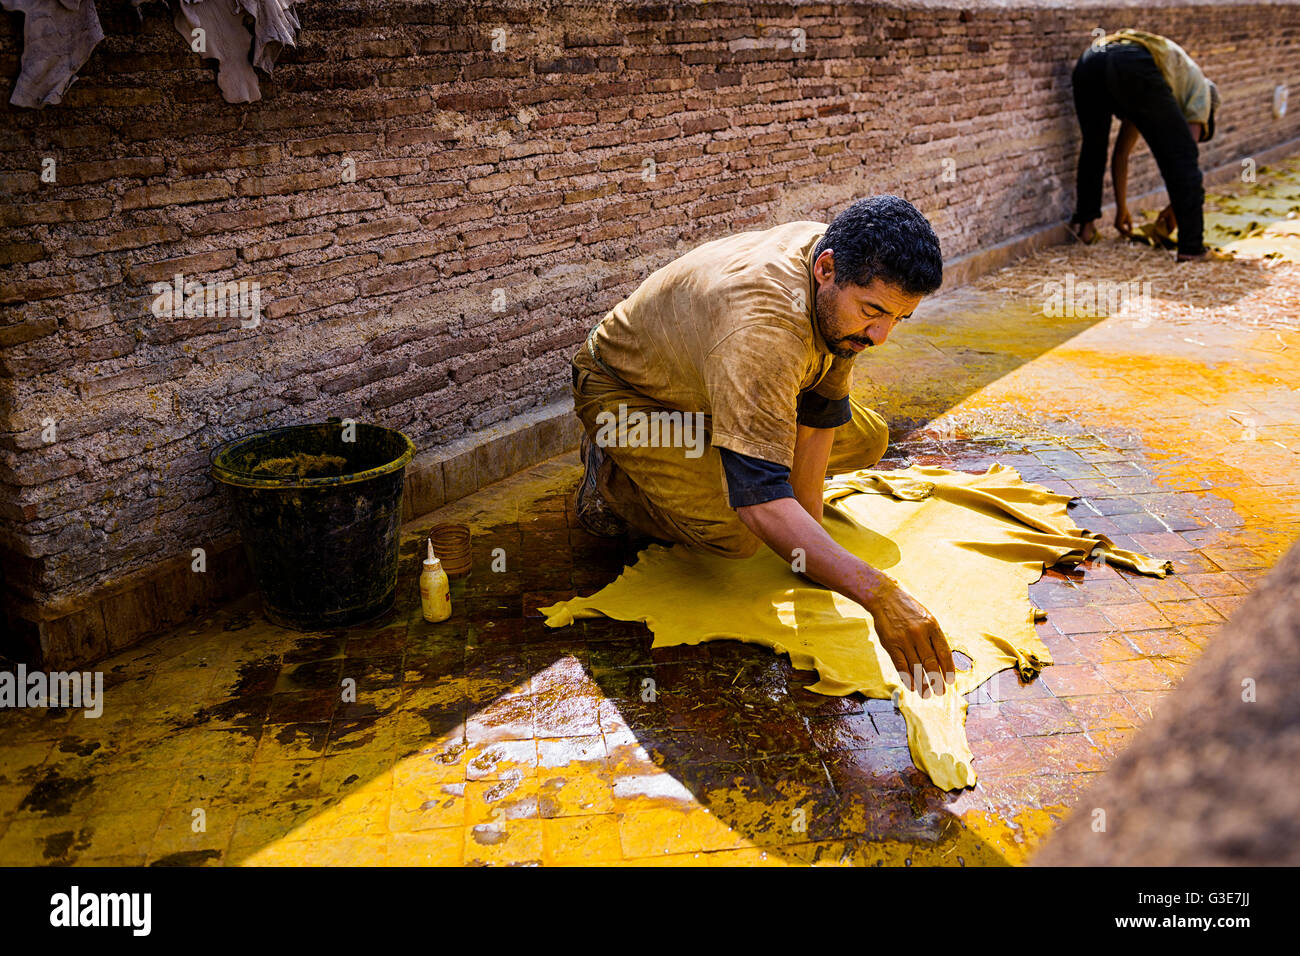 Fez, Morocco - April 11, 2016: One man working in a tannery in the city of Fez in Morocco. Stock Photo